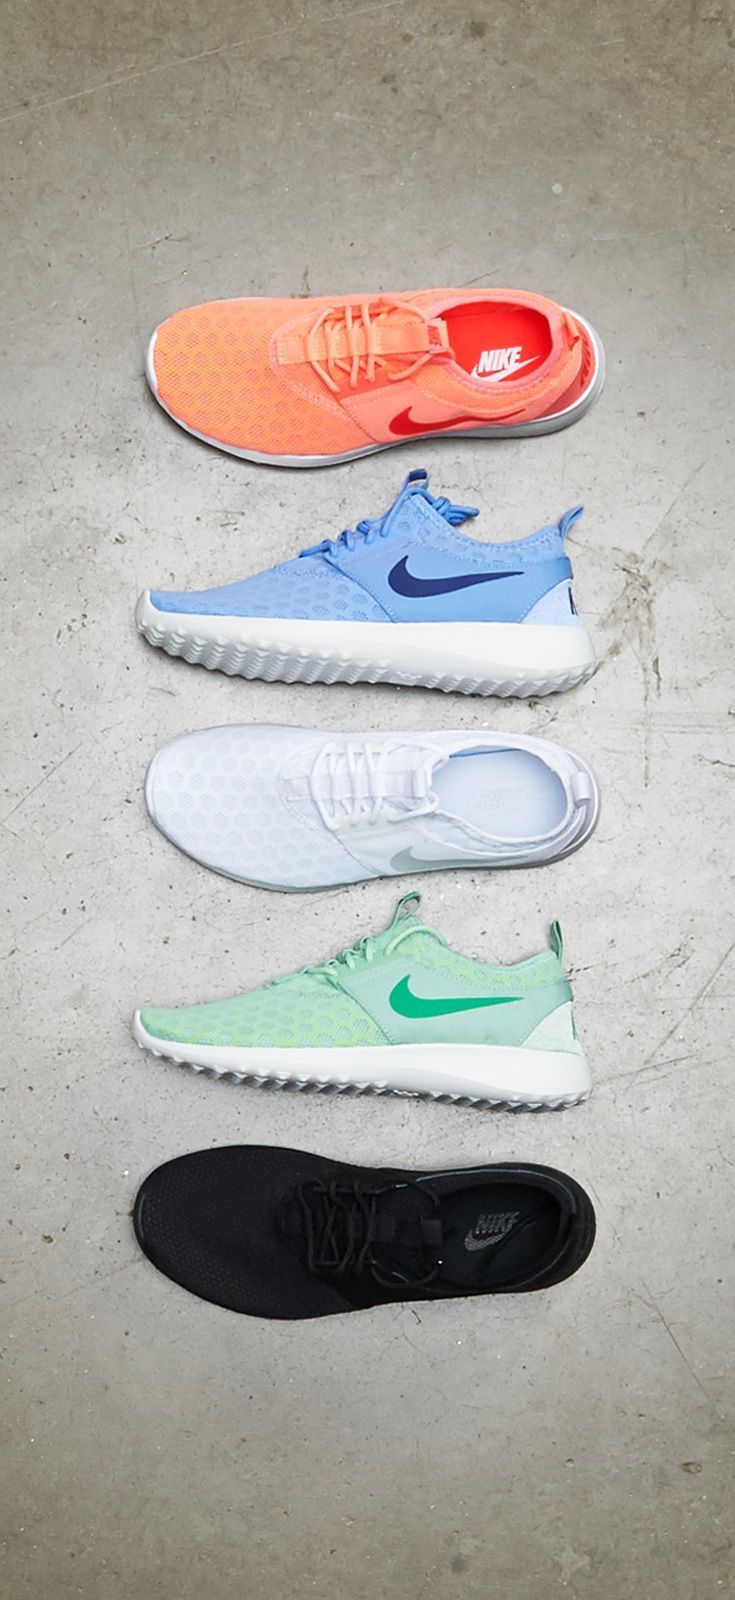 A must-have kick in multiple colors — Nike Juvenate.